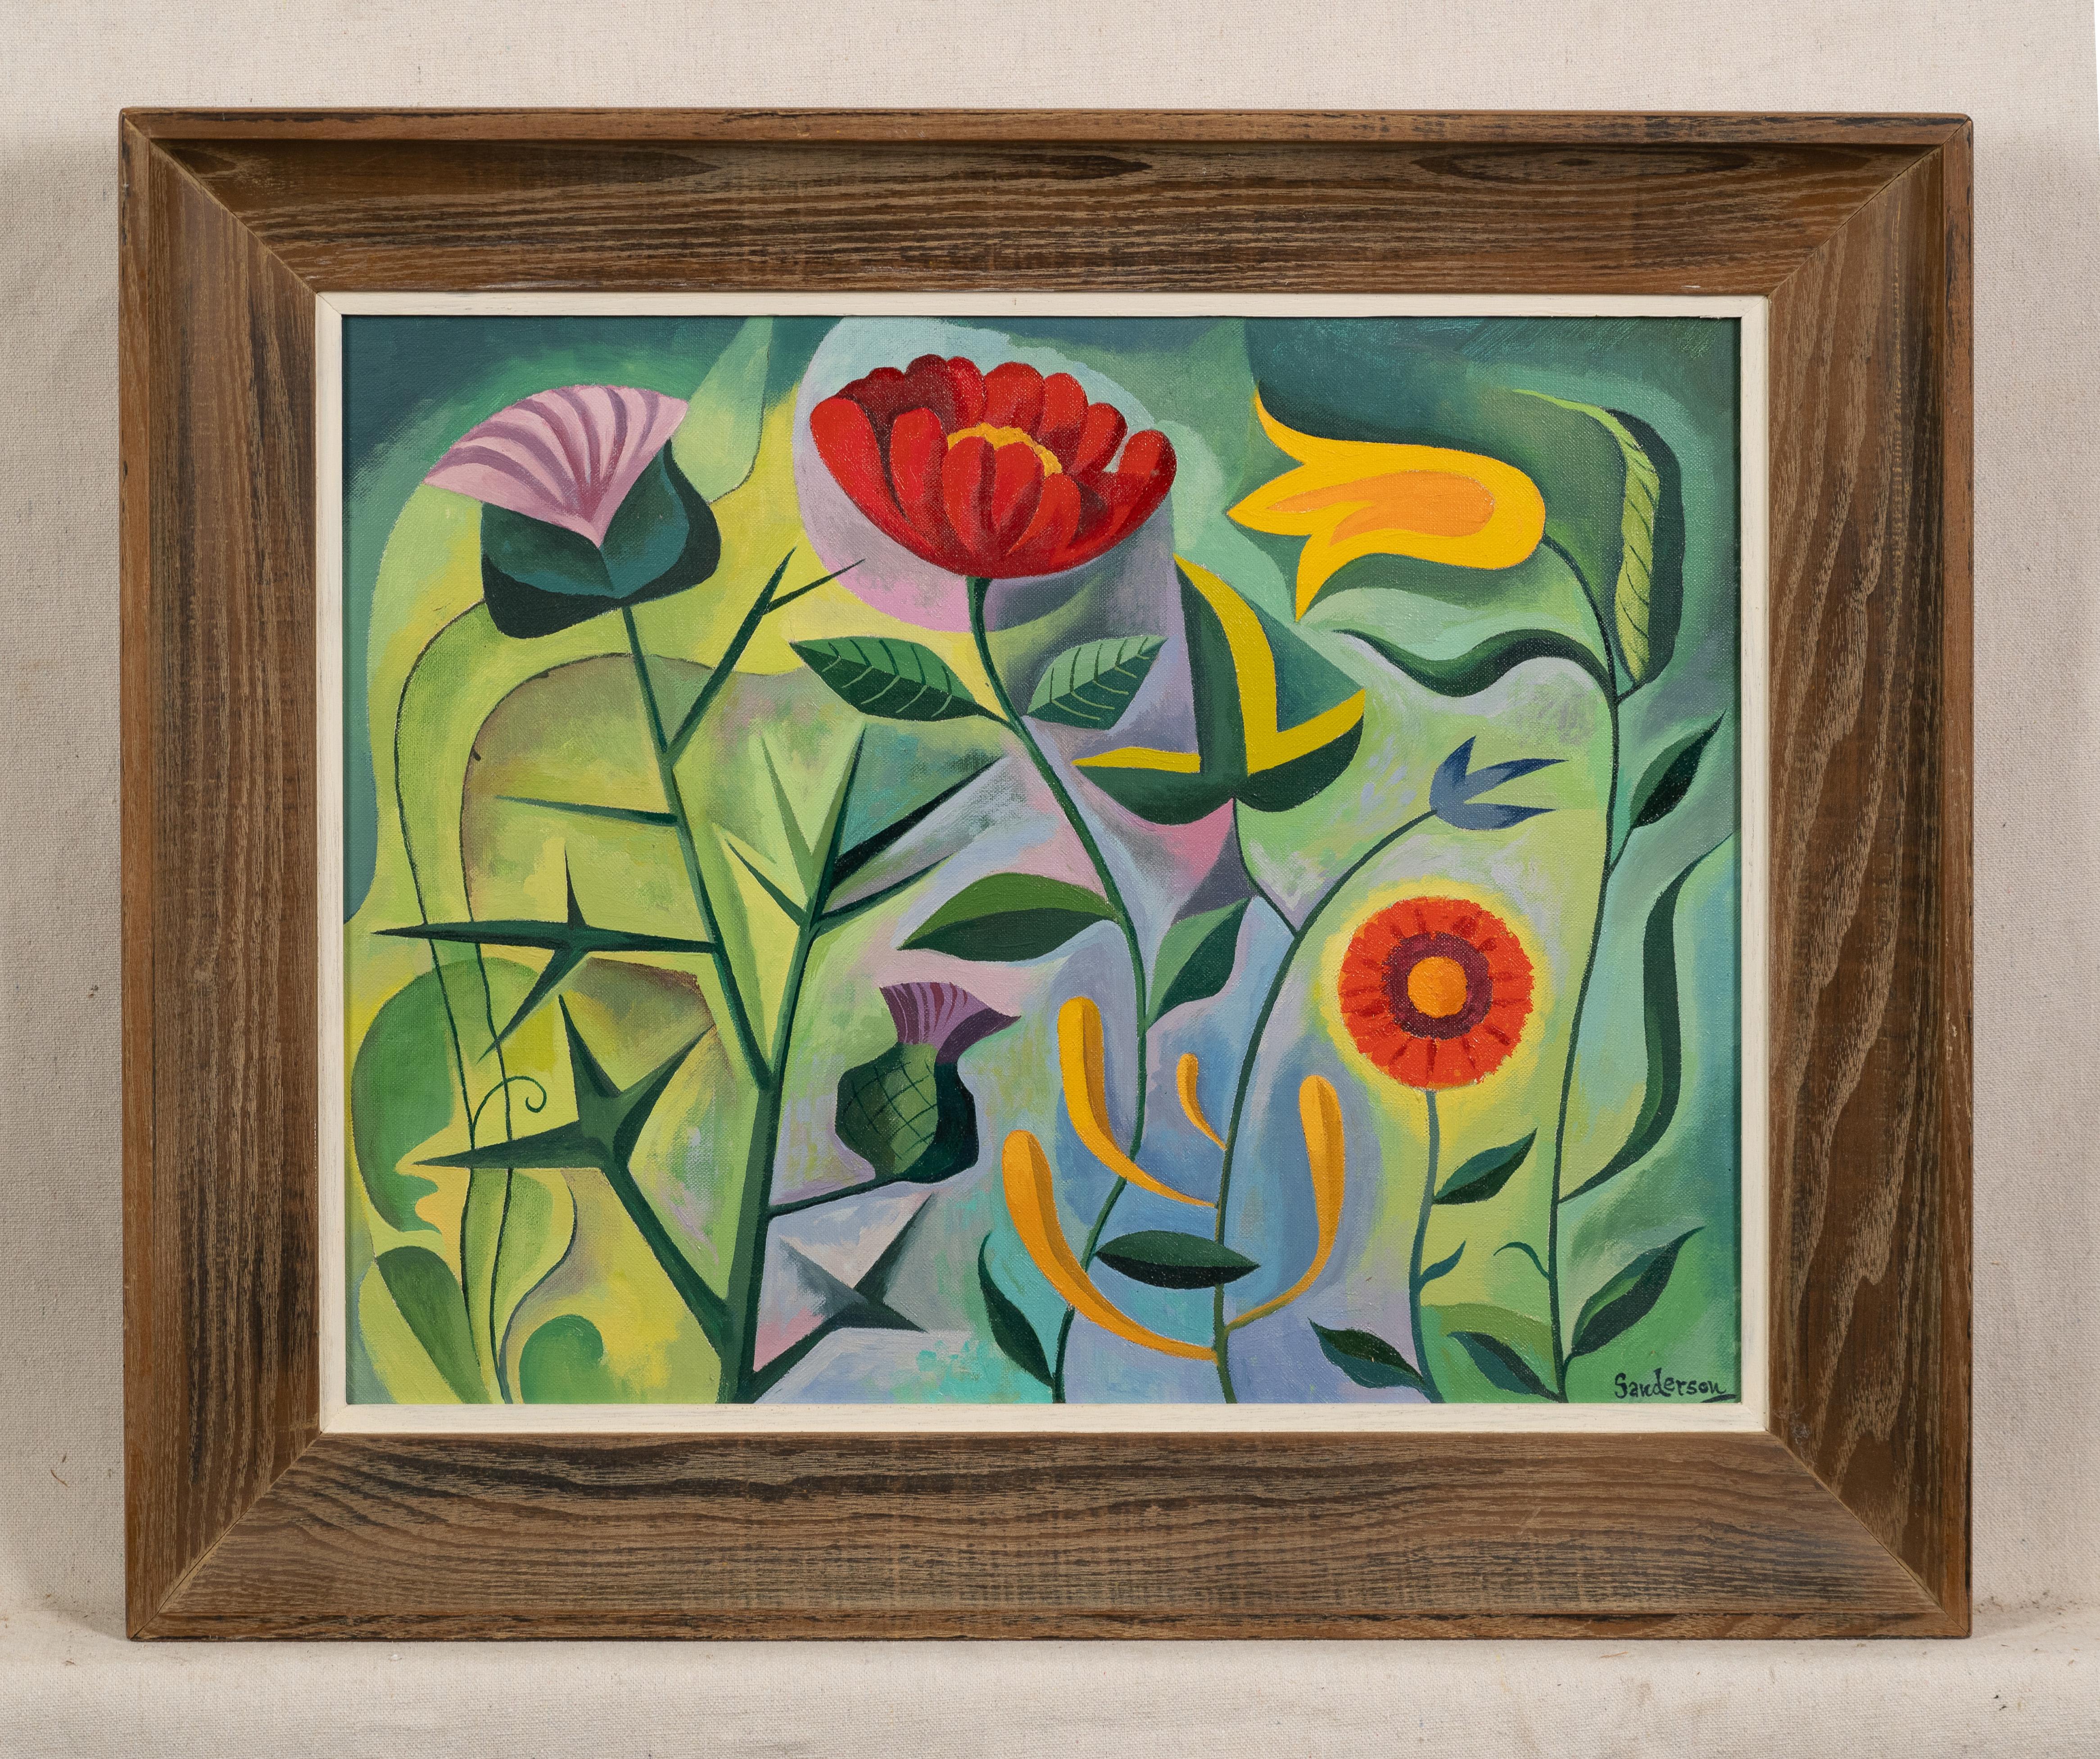 Antique American modernist still life oil painting by William Sanderson (1905 - 1990).  Oil on board.  Framed.   Signed.